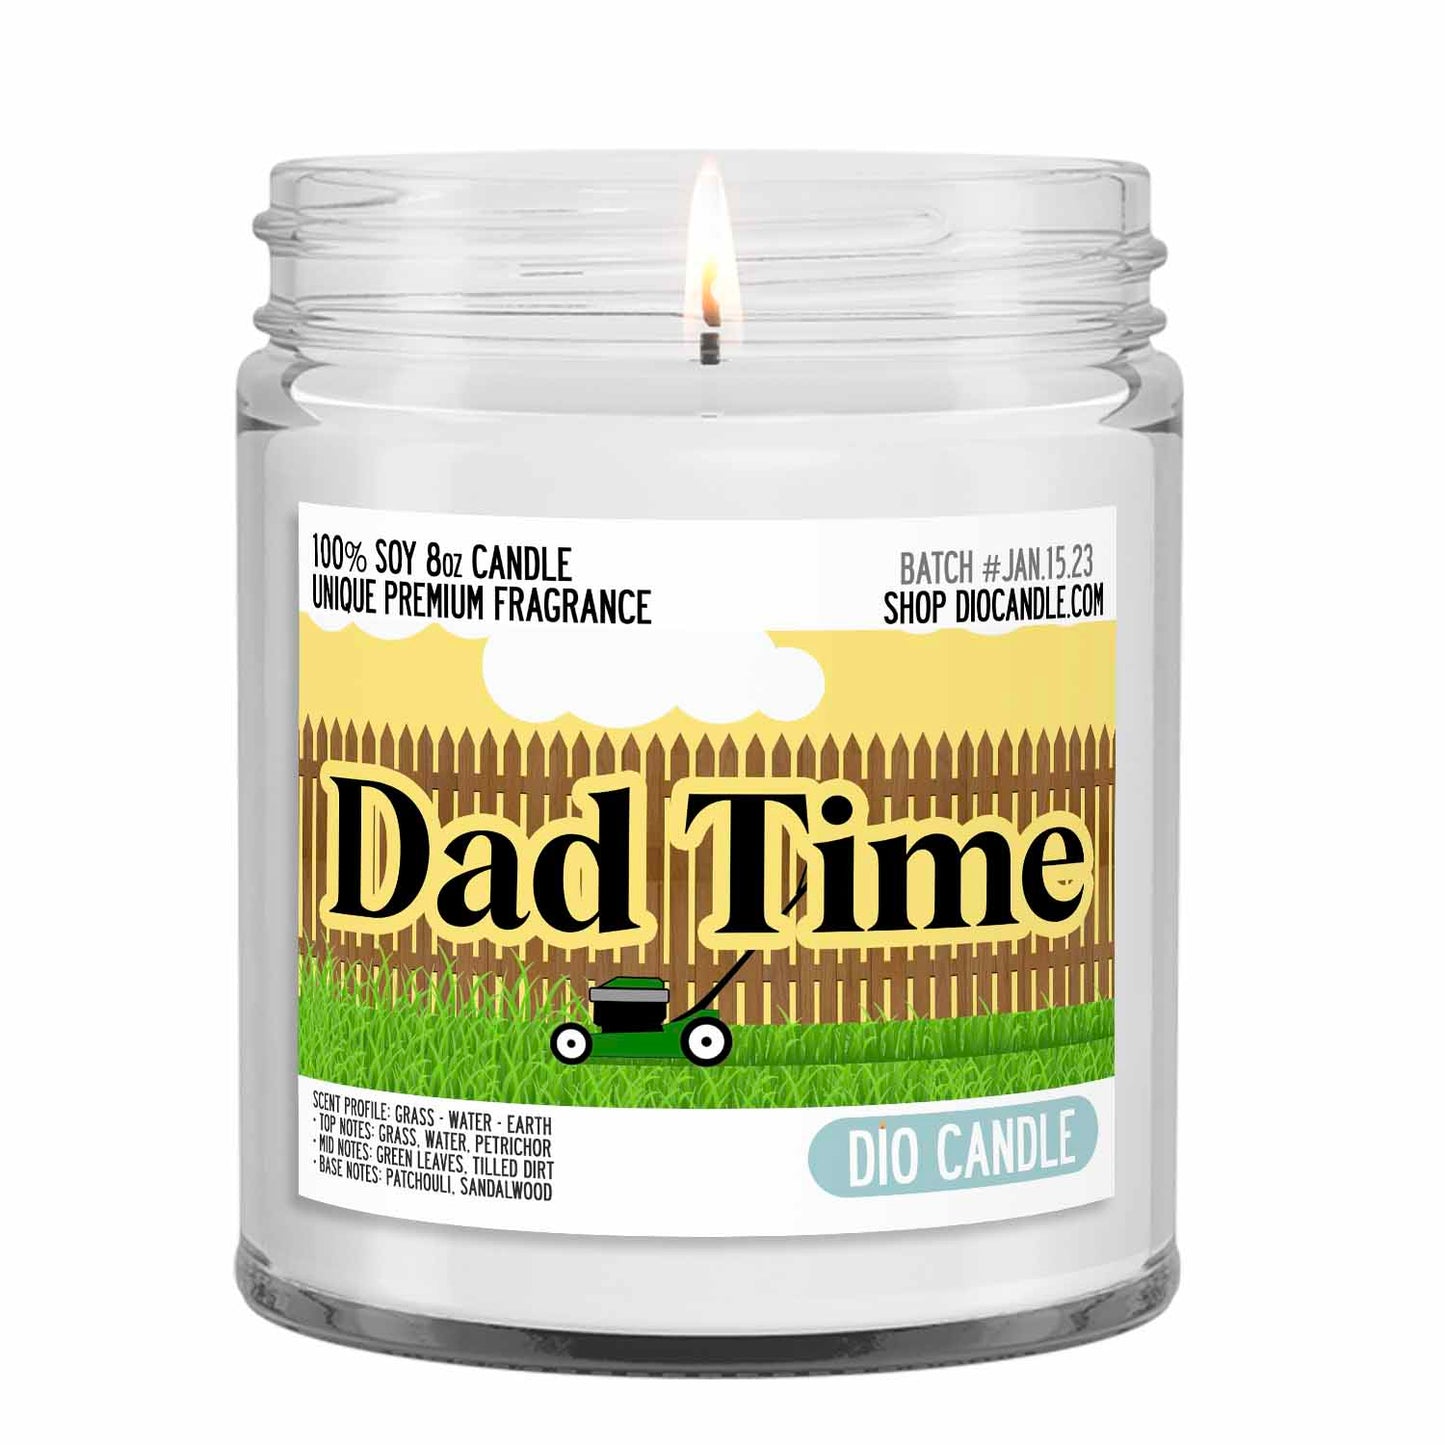 Dad Time Candle